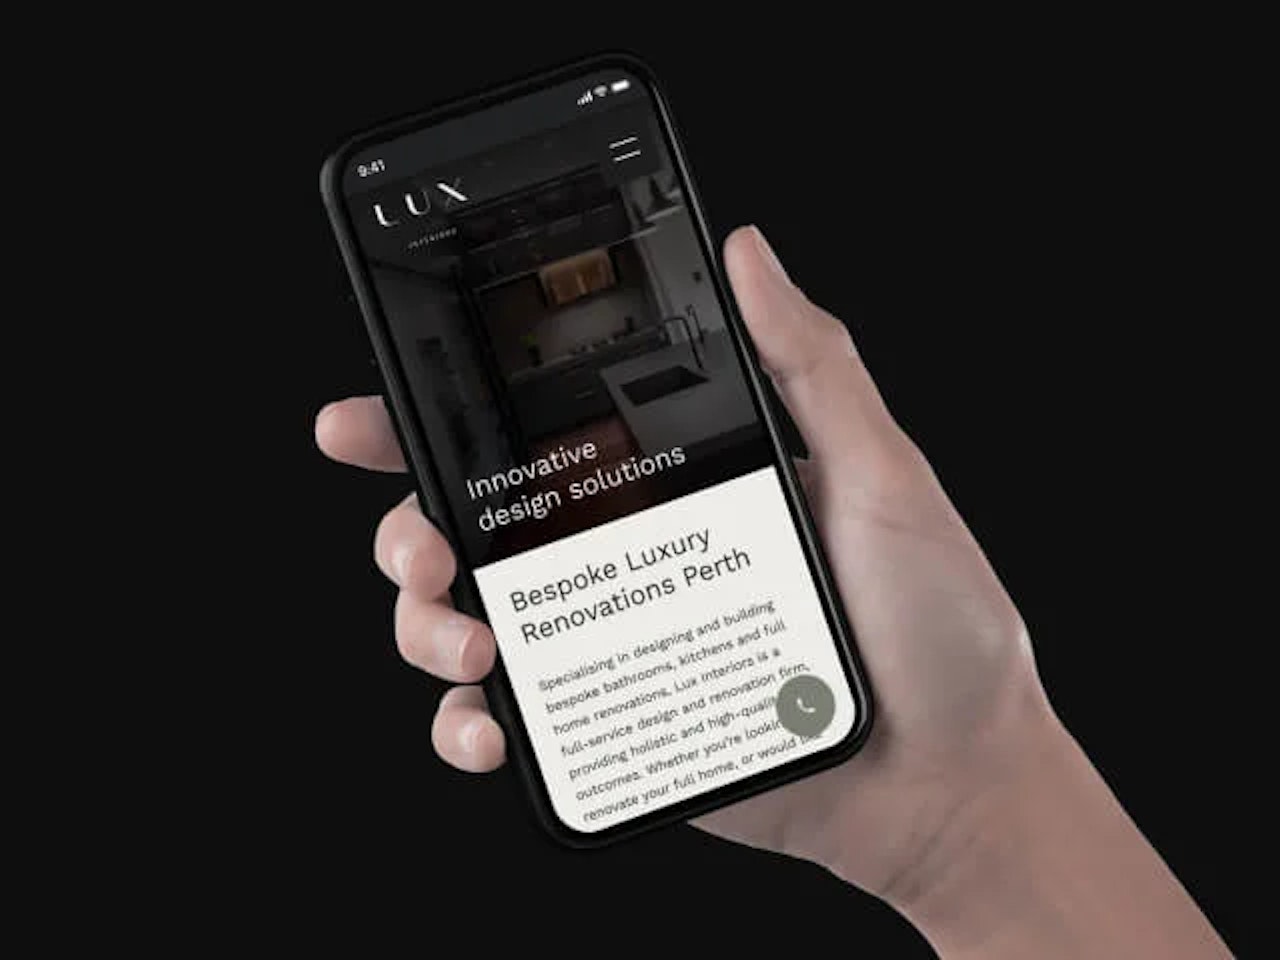 A photo of an iPhone mockup with the Lux Interiors website featured inside of it.